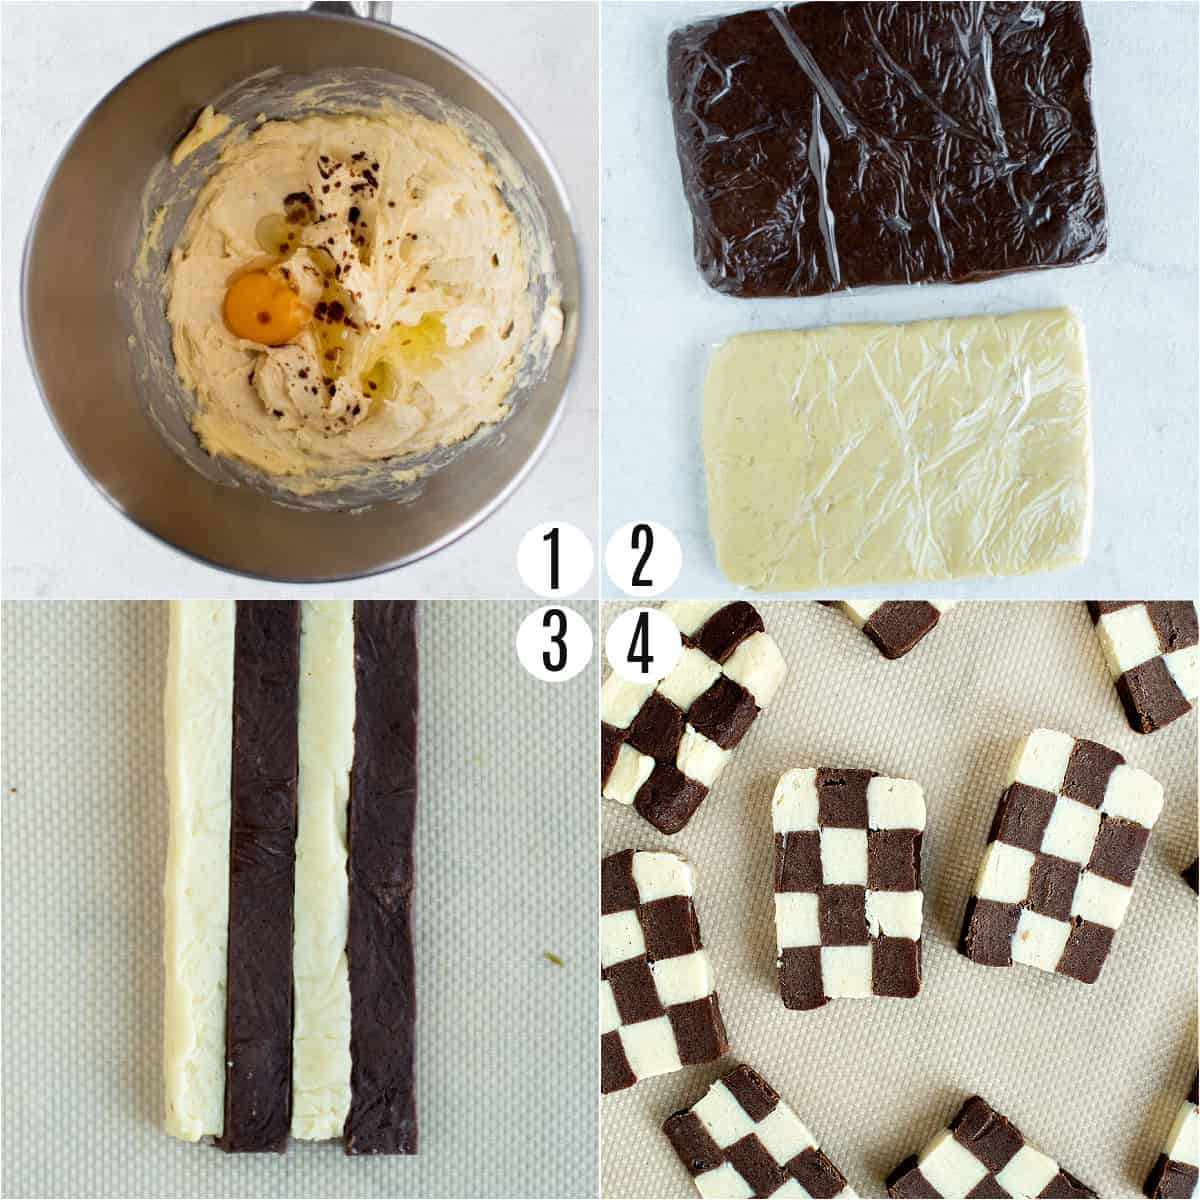 Step by step photos showing how to make checkerboard cookies.